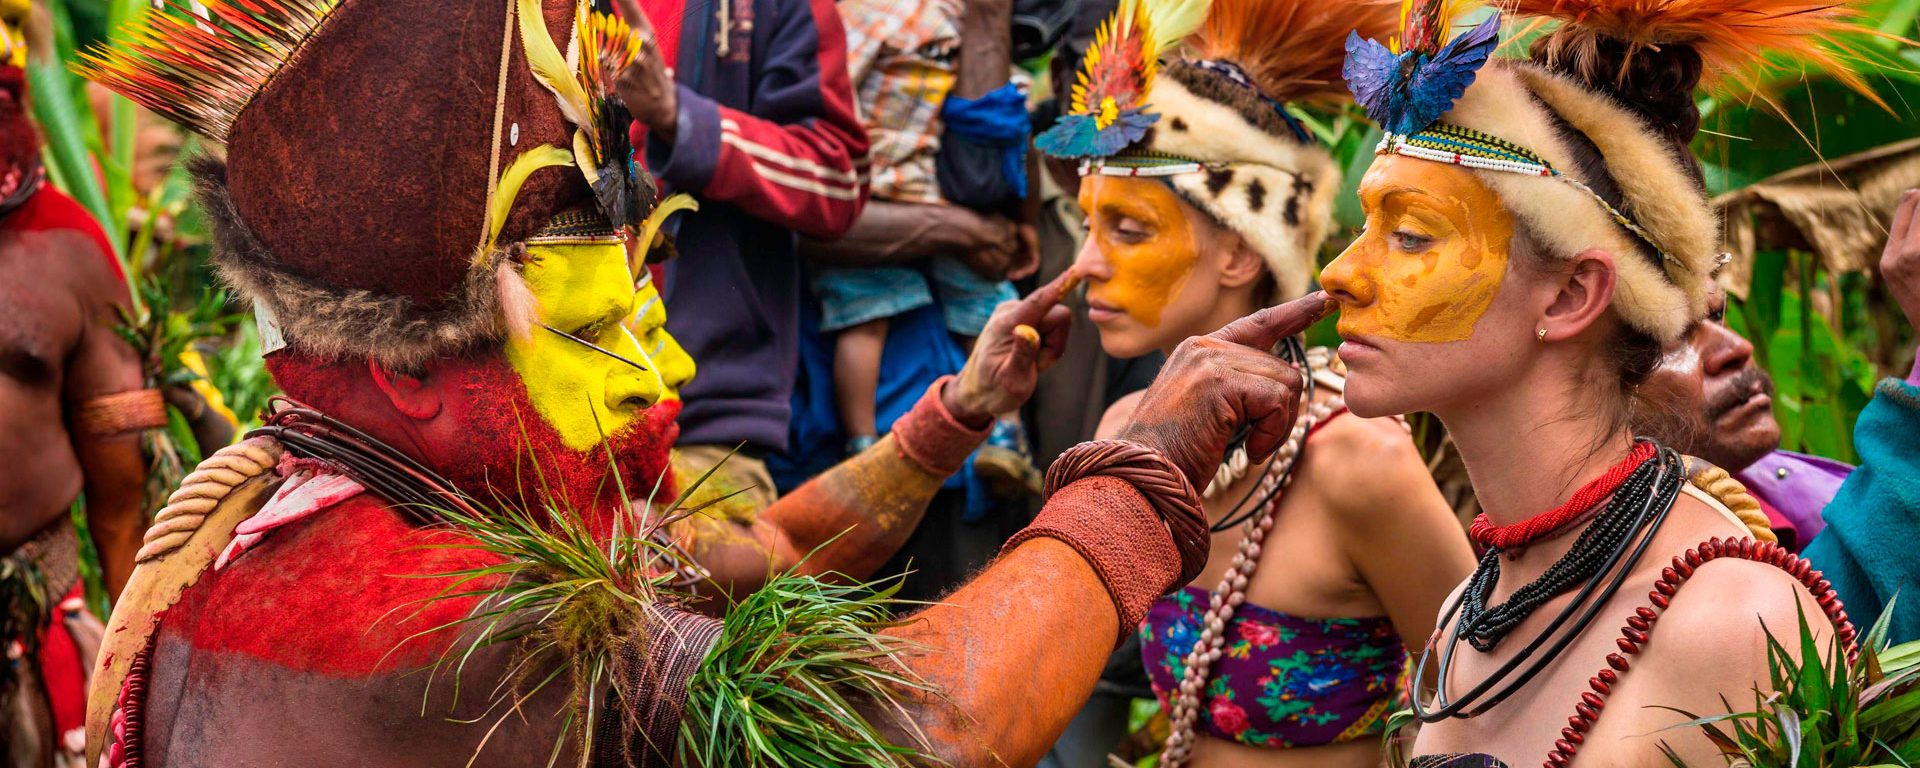 Tribesmen paint the faces of visitors during a traditional sing-sing in Papua New Guinea's Mount Hagen